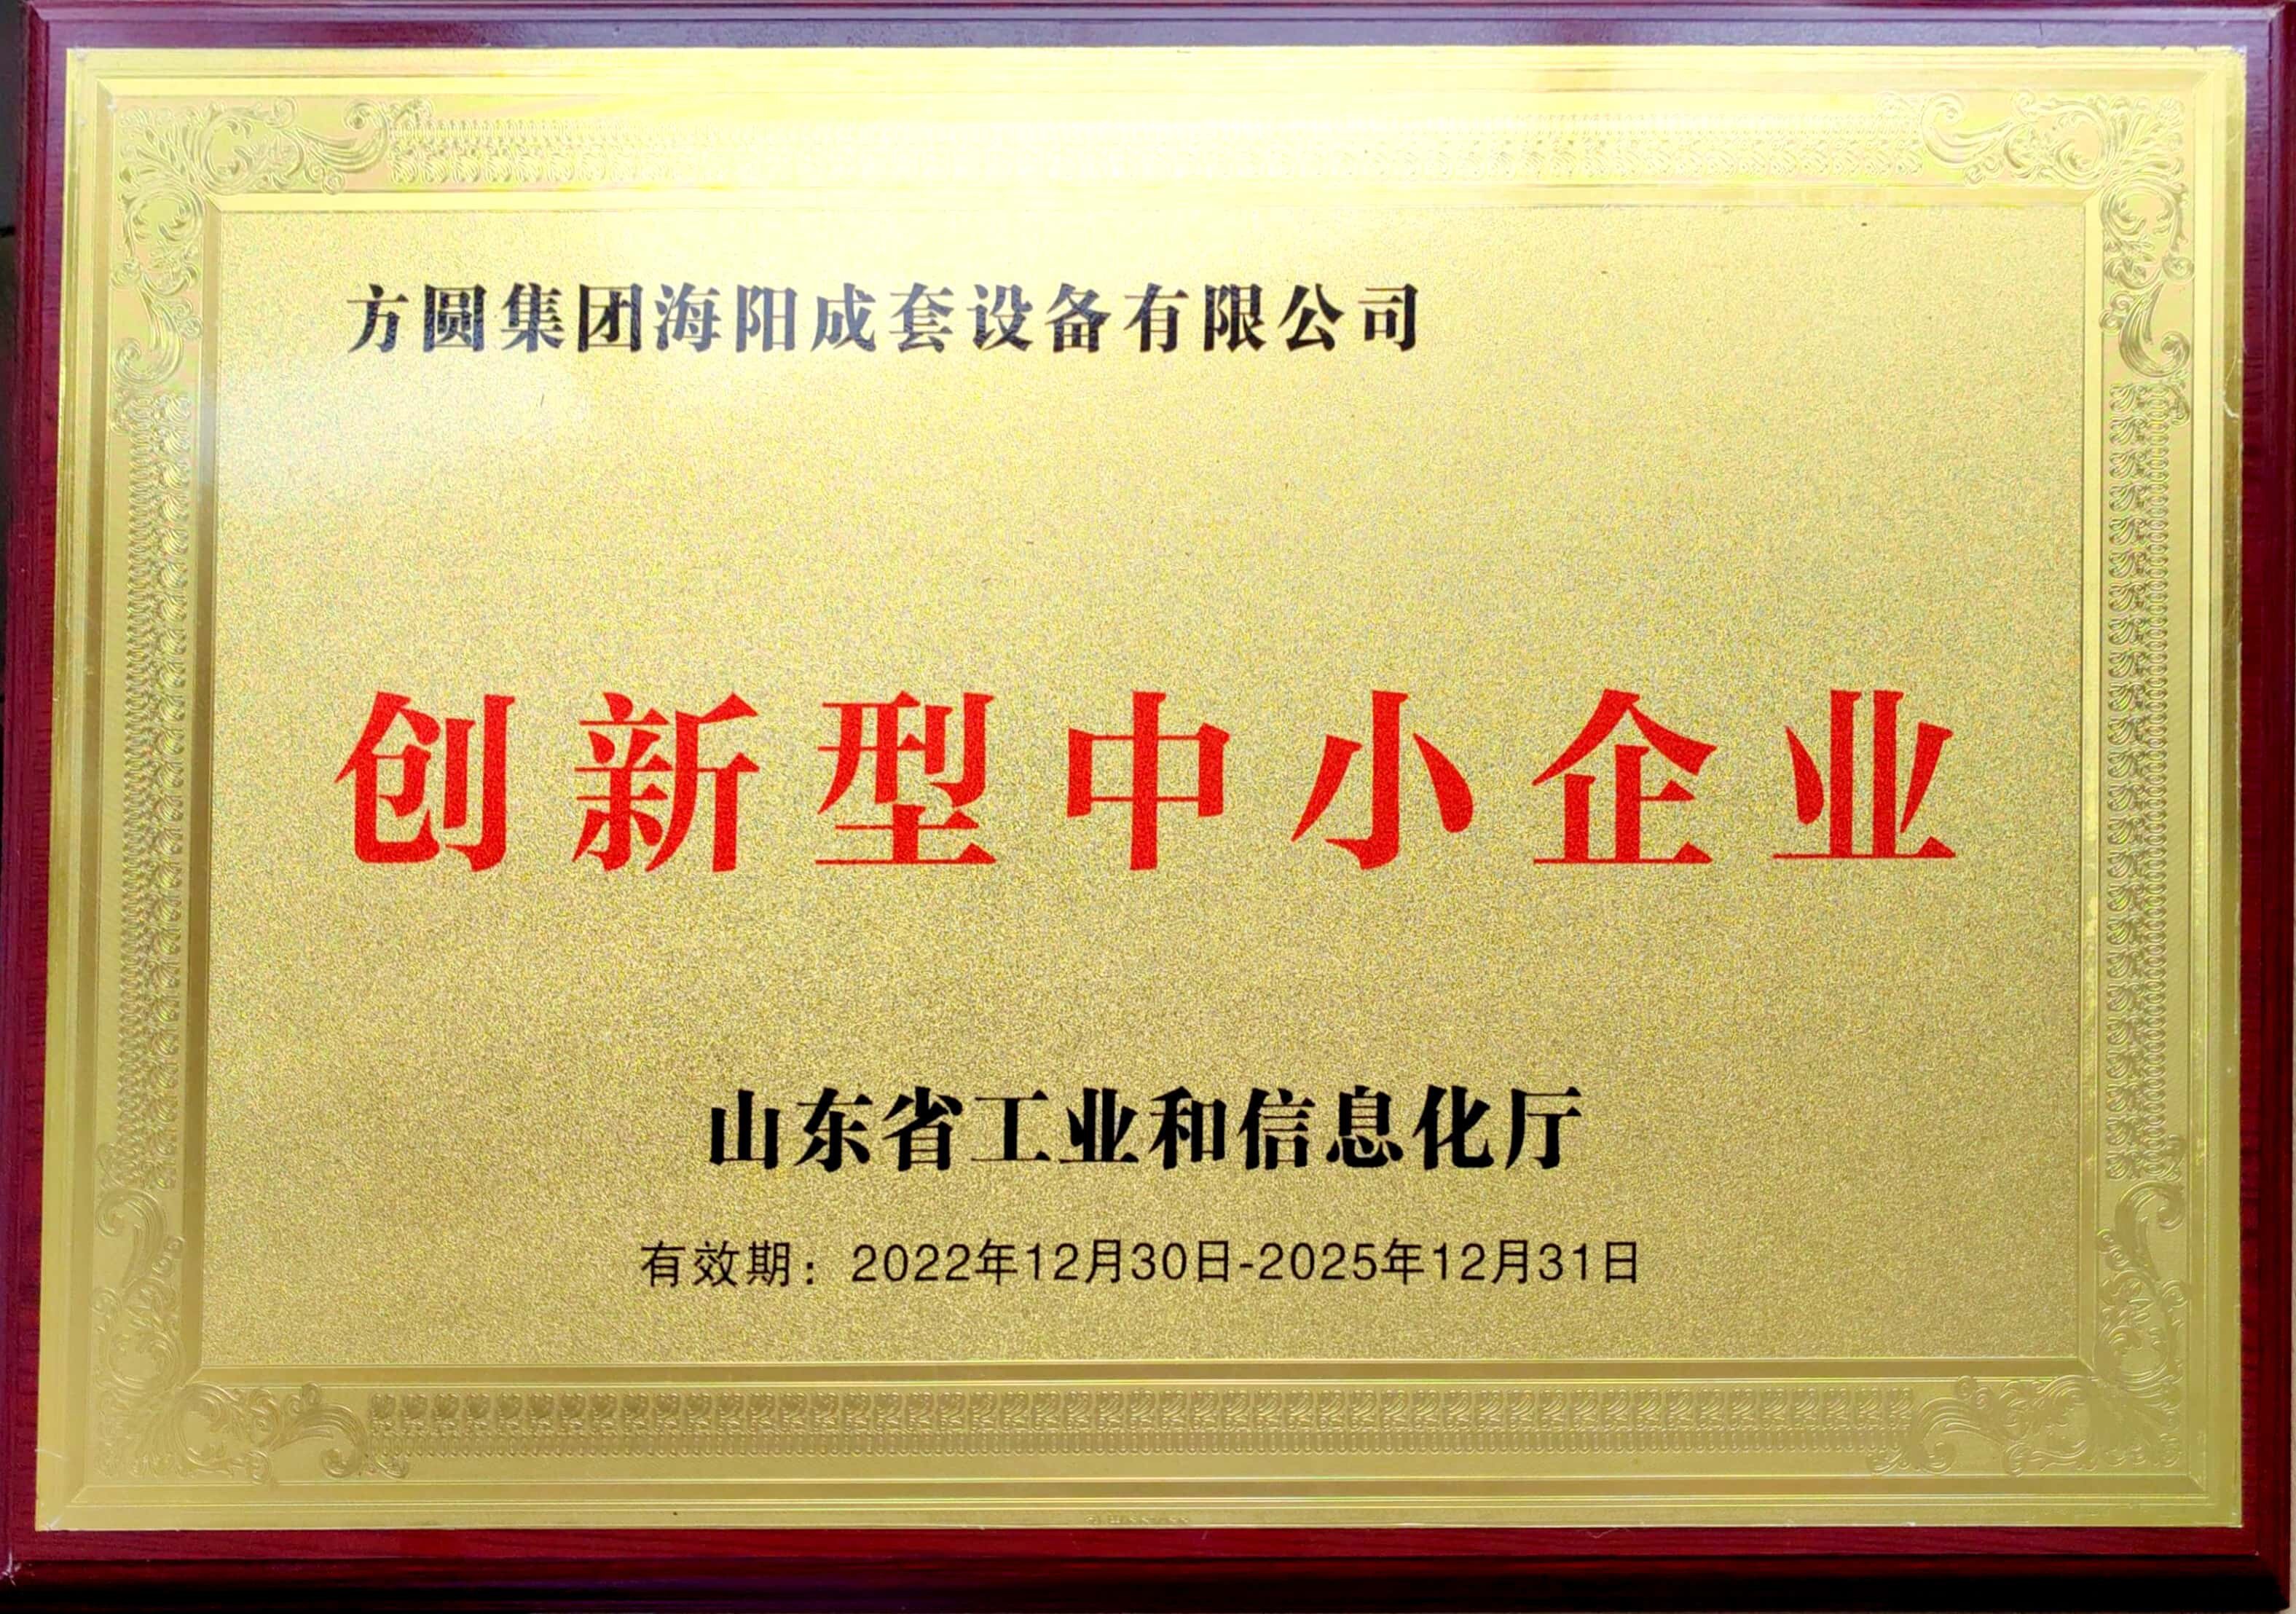 Many enterprises such as Fangyuan Group Complete Equipment Co., Ltd. have been awarded the title of "Innovative Small and Medium-sized Enterprises".